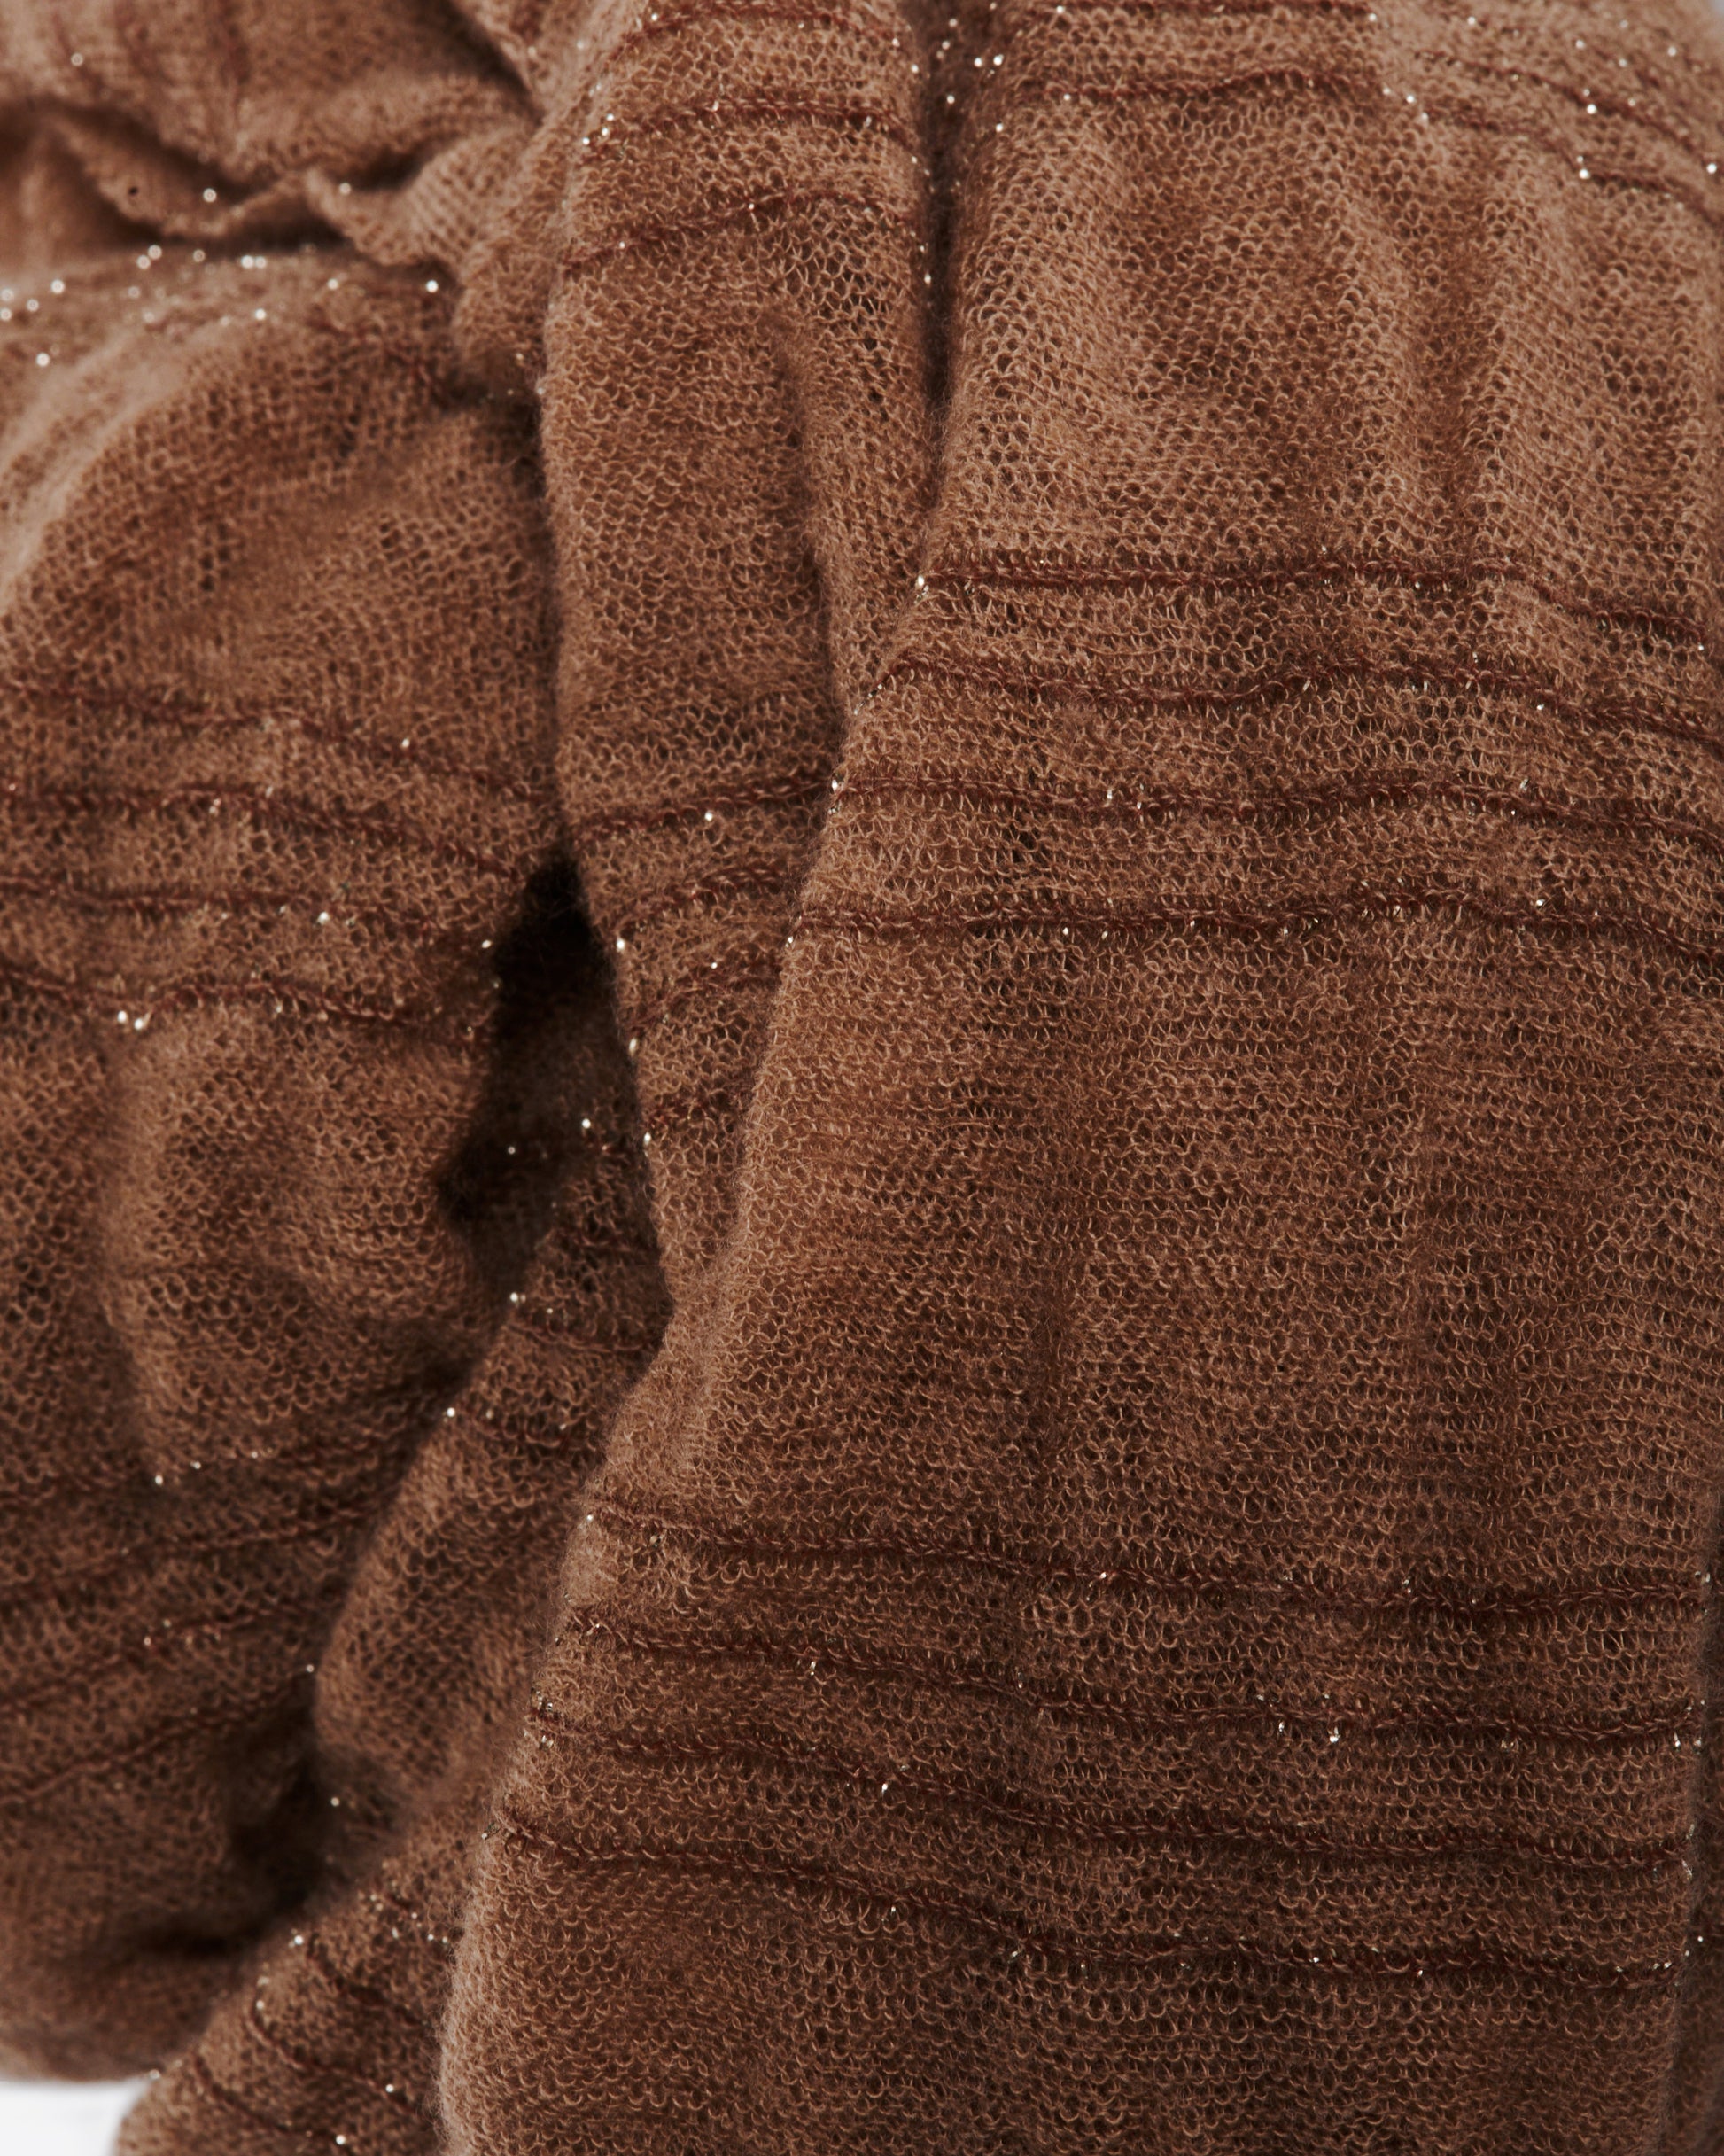 A cashmere, mocha-colored scarf with sparkly lurex stripes.